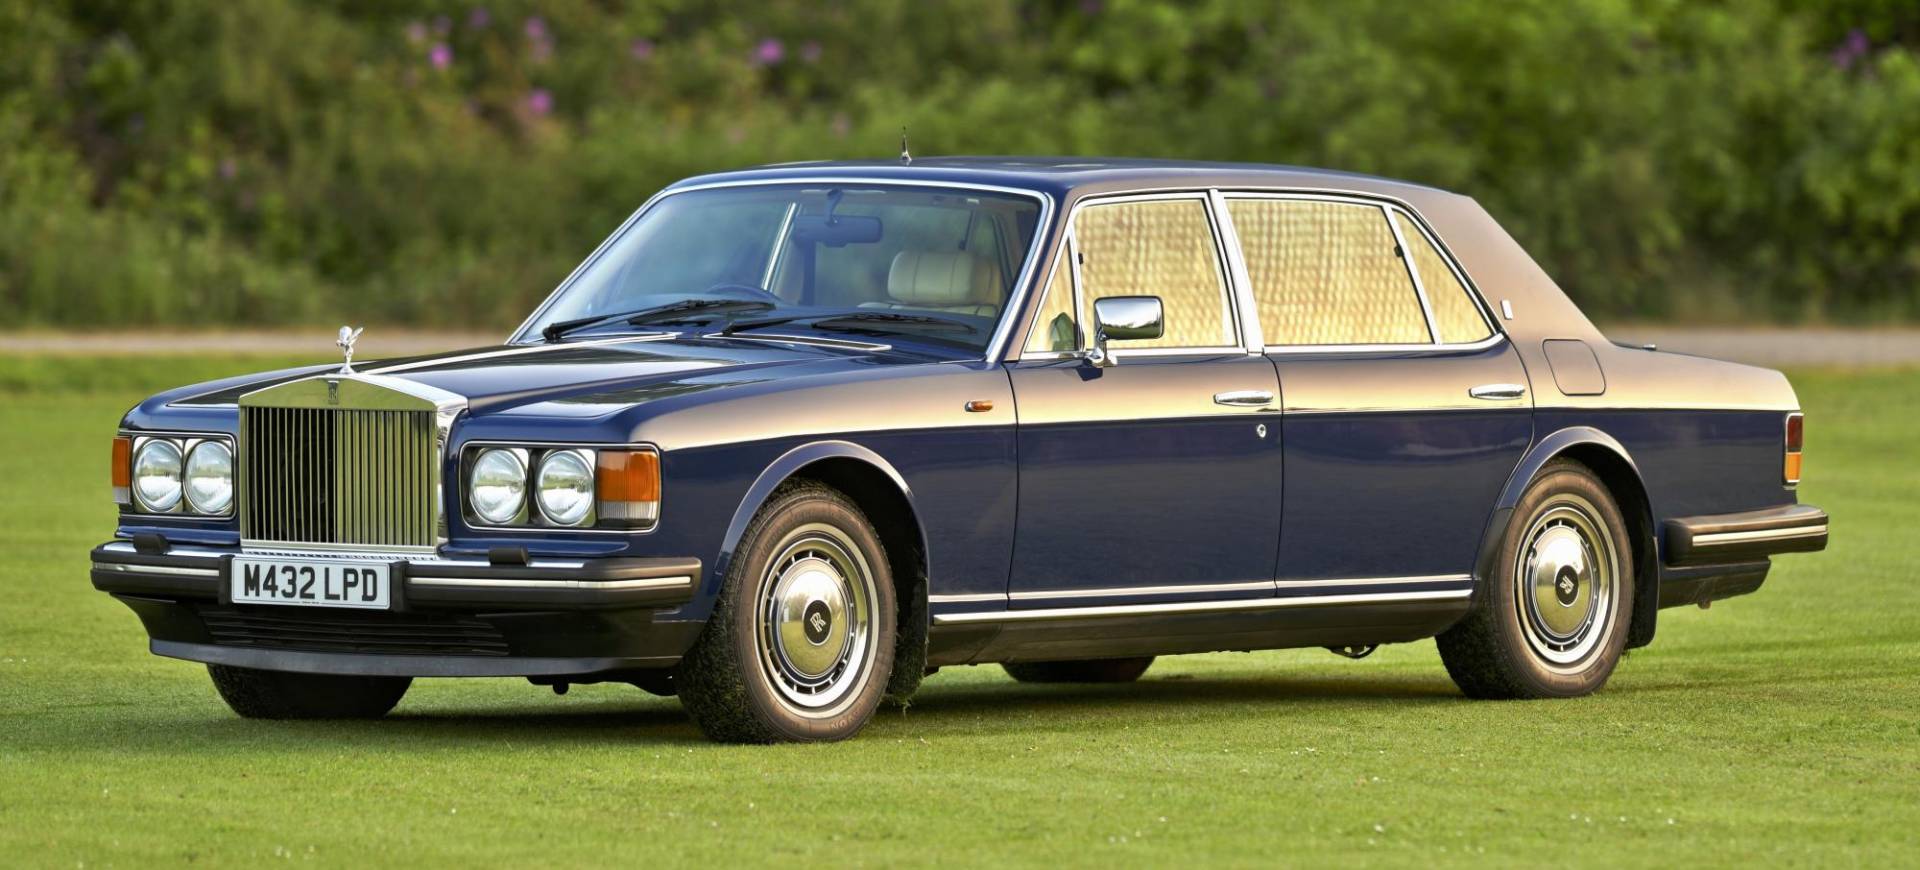 A 1986 Rolls Royce Silver Spirit D493 BMV twin carb five door saloon  6750cc in vermilion red circa 93389 recorded miles V5 manual and part  service history originally retailed by Jack Barclay